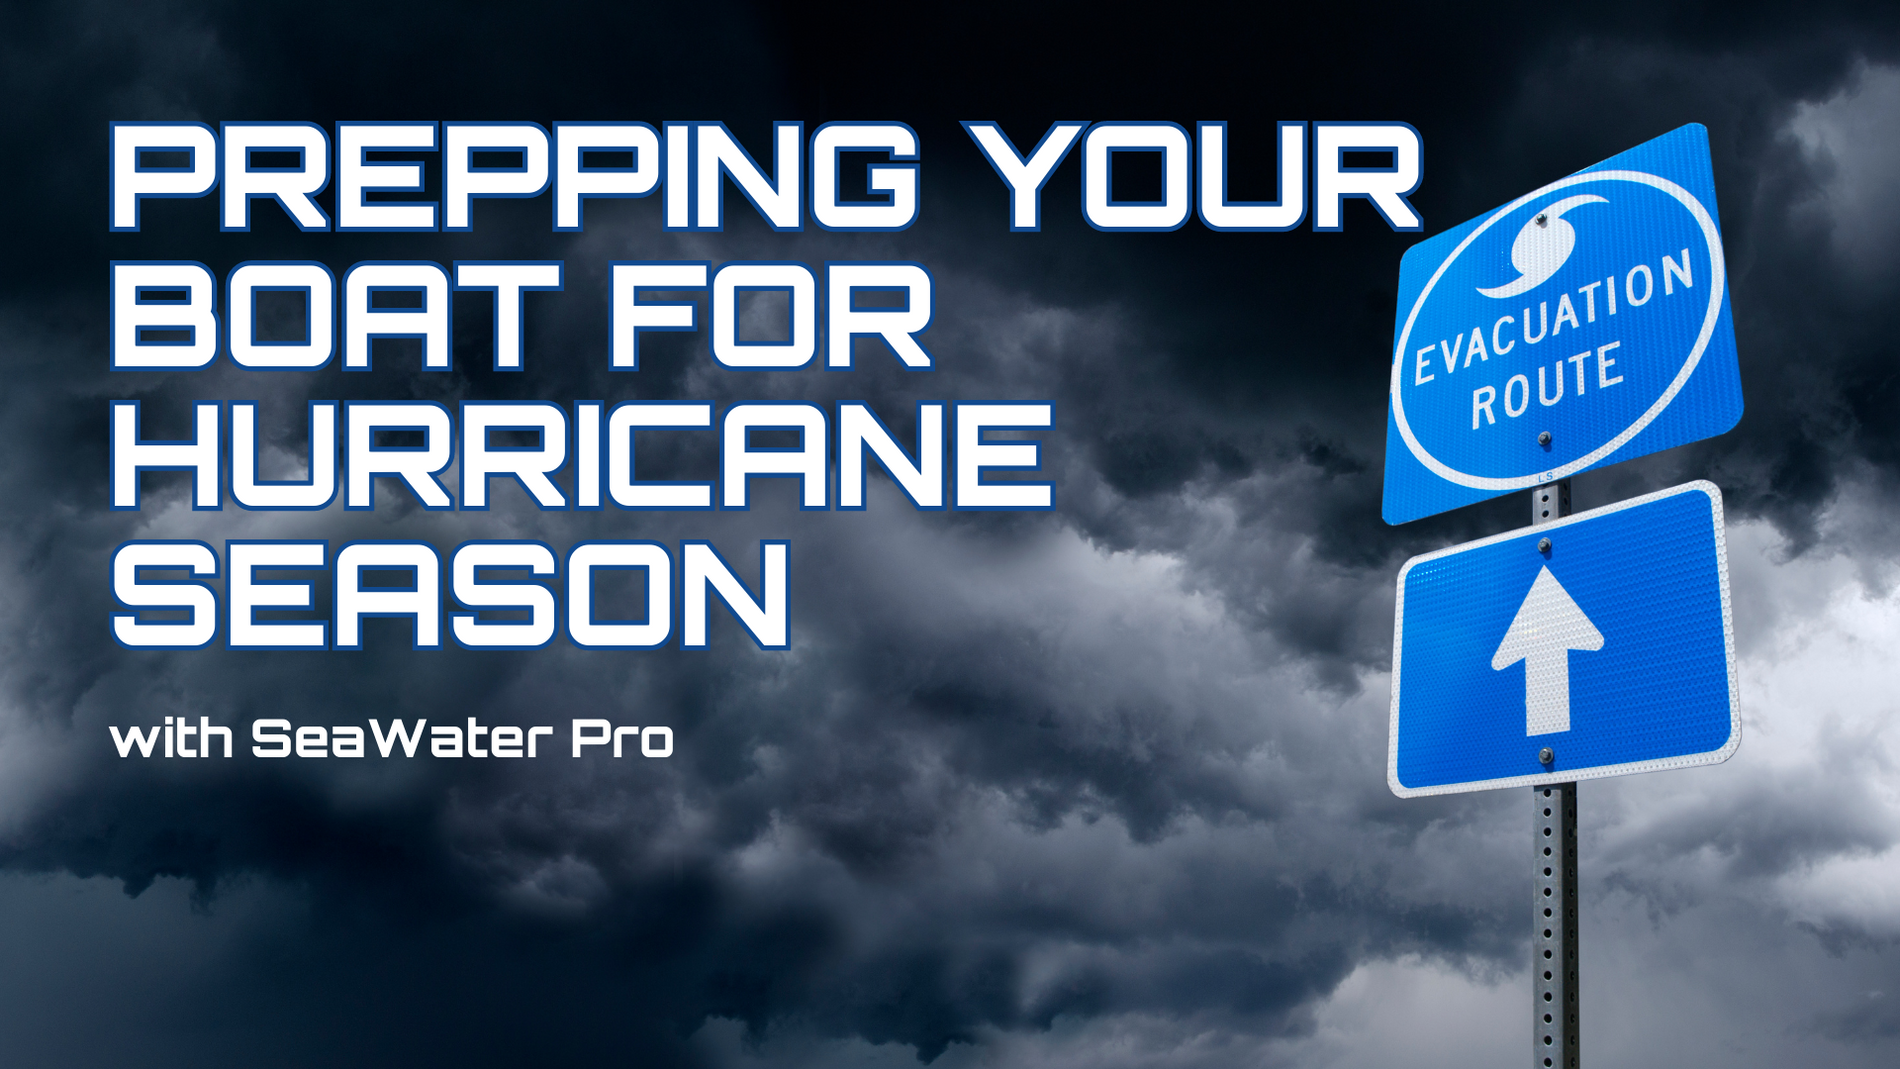 Prepping your Boat for Hurricane Season with SeaWater Pro